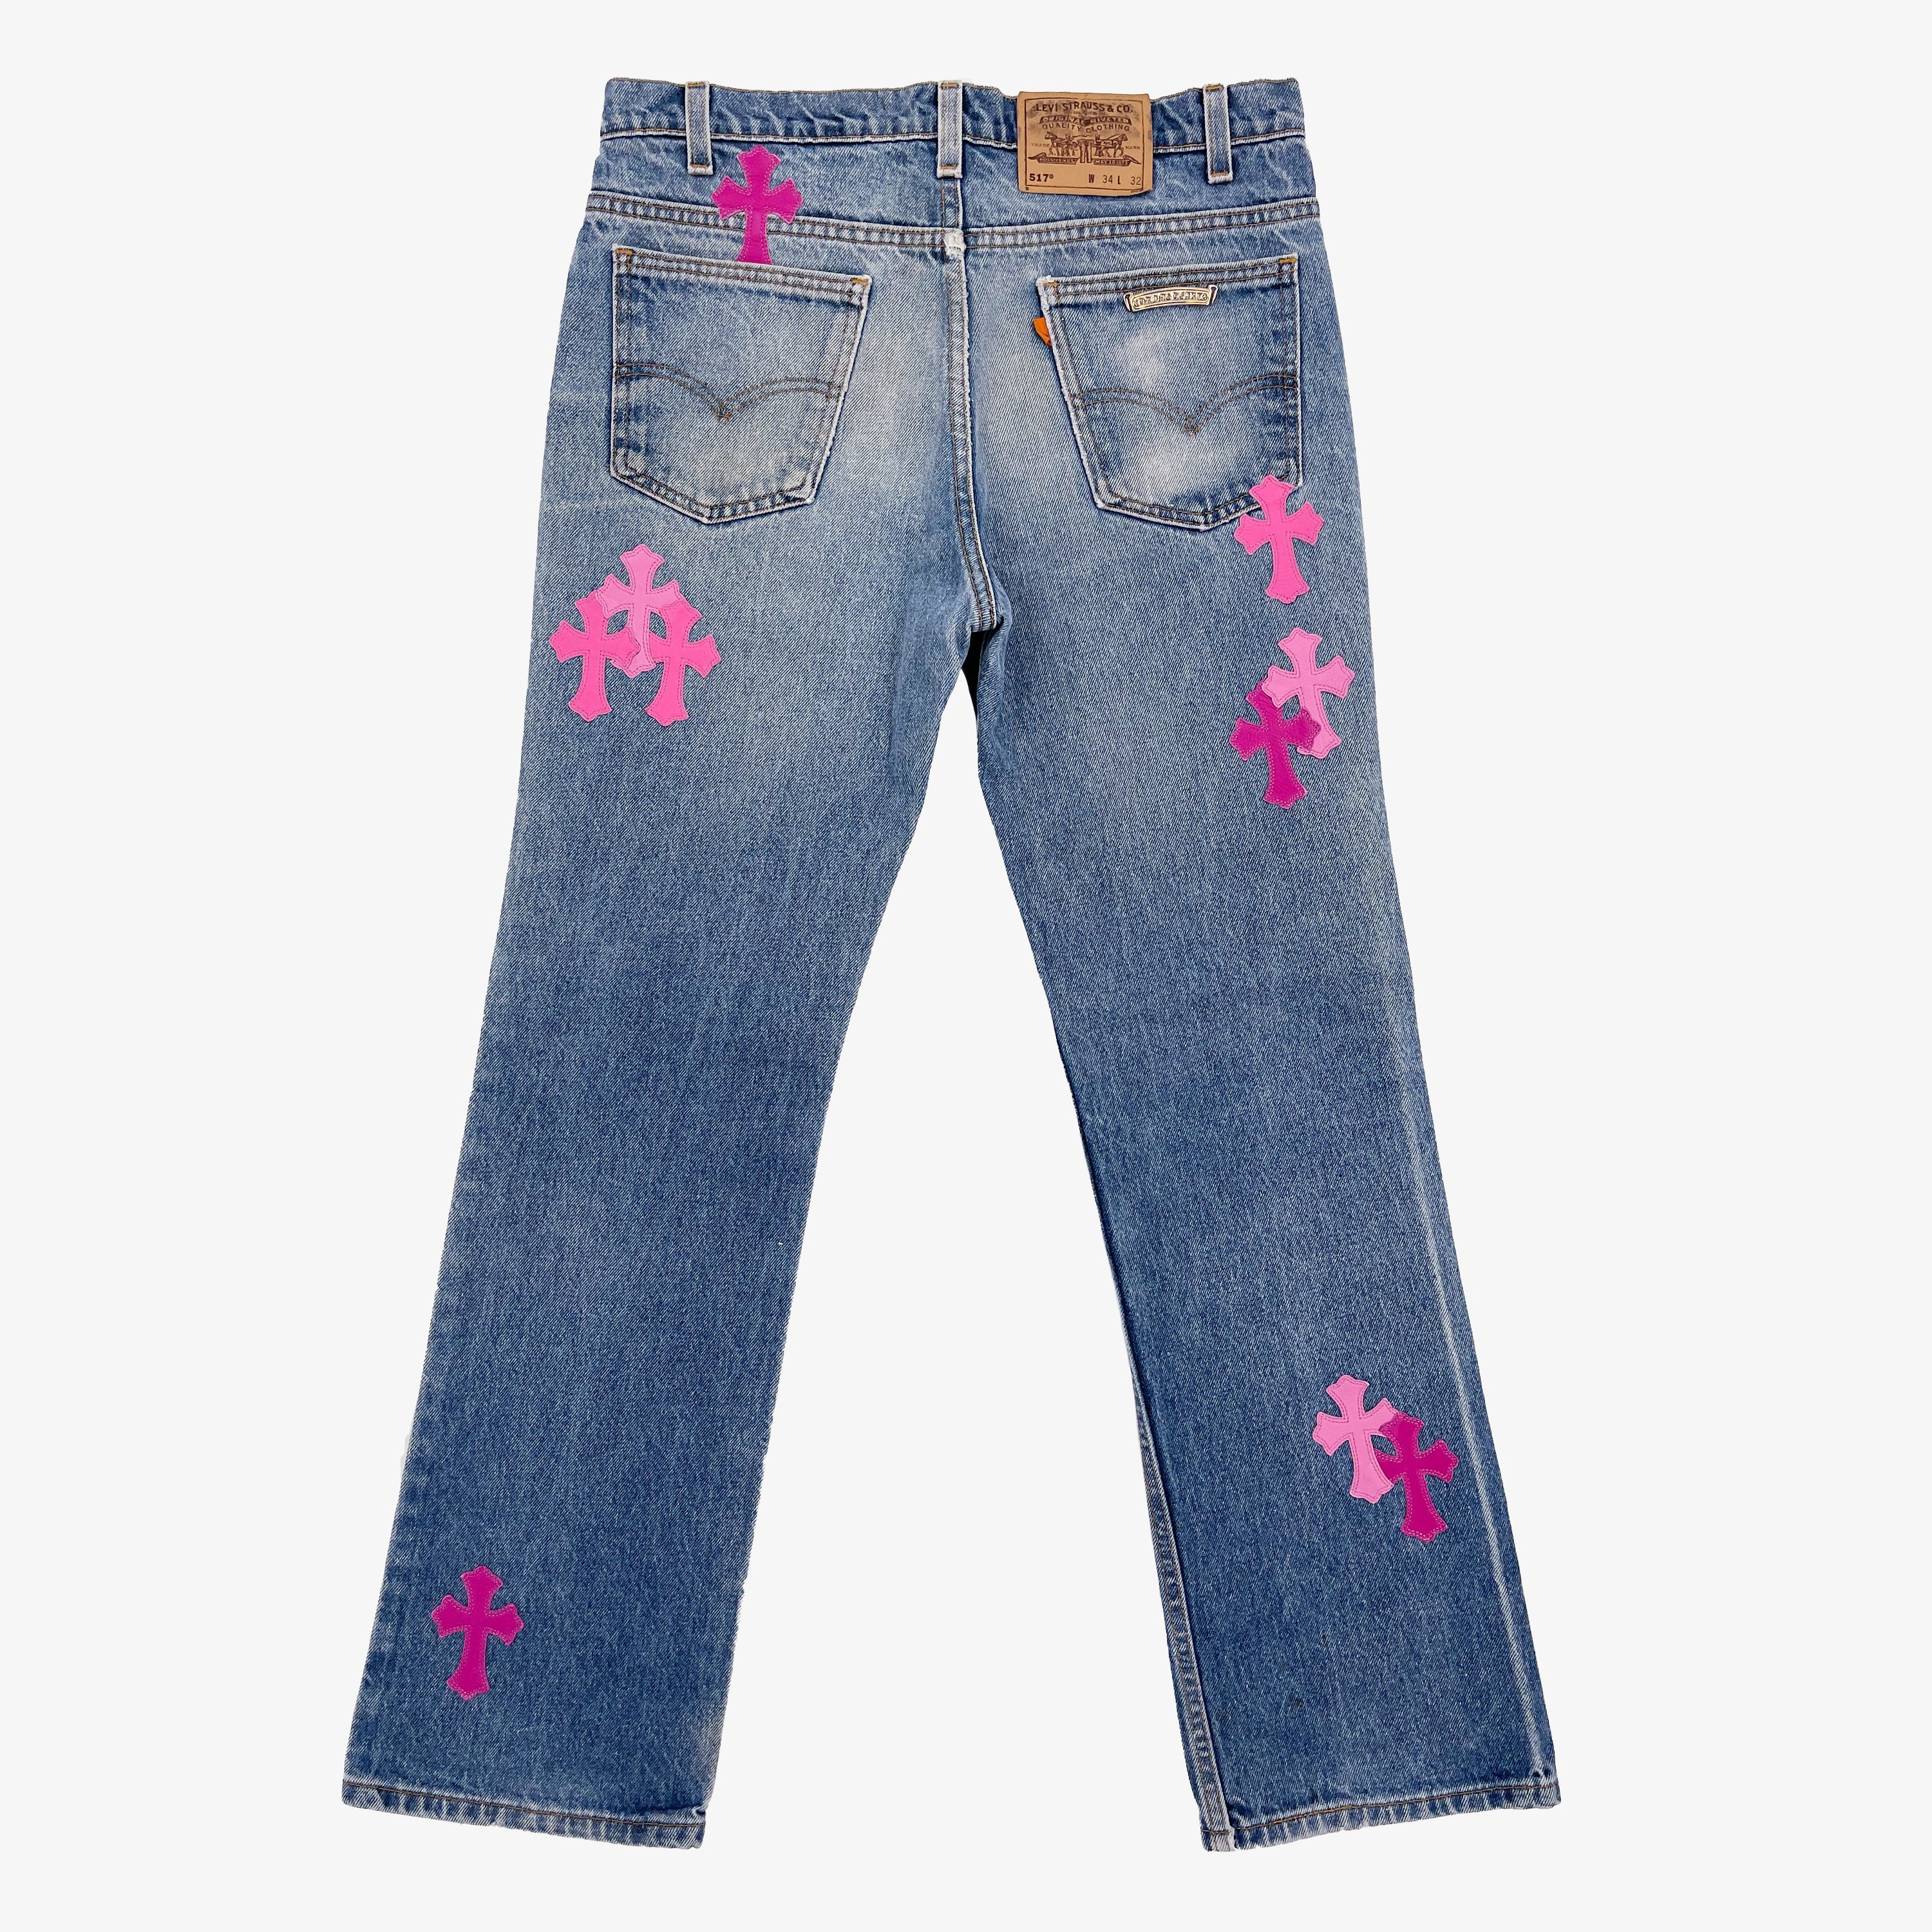 Chrome Hearts Pink & Checkered Cross Patch Fleurknee Jeans